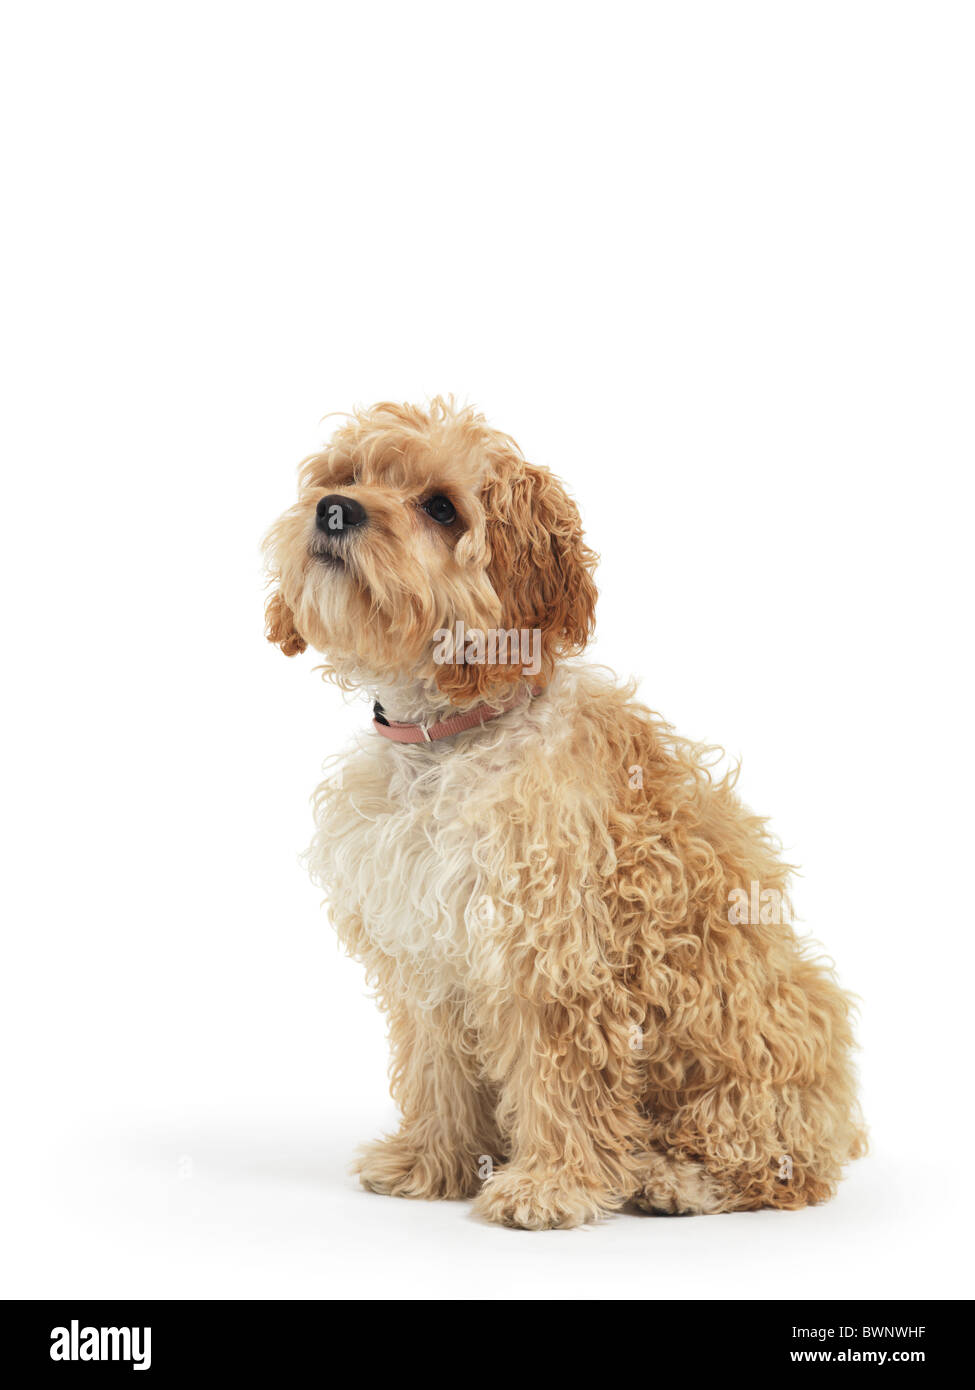 License available at MaximImages.com - Cockapoo cute cross breed dog of cocker spaniel and a poodle isolated on white background Stock Photo